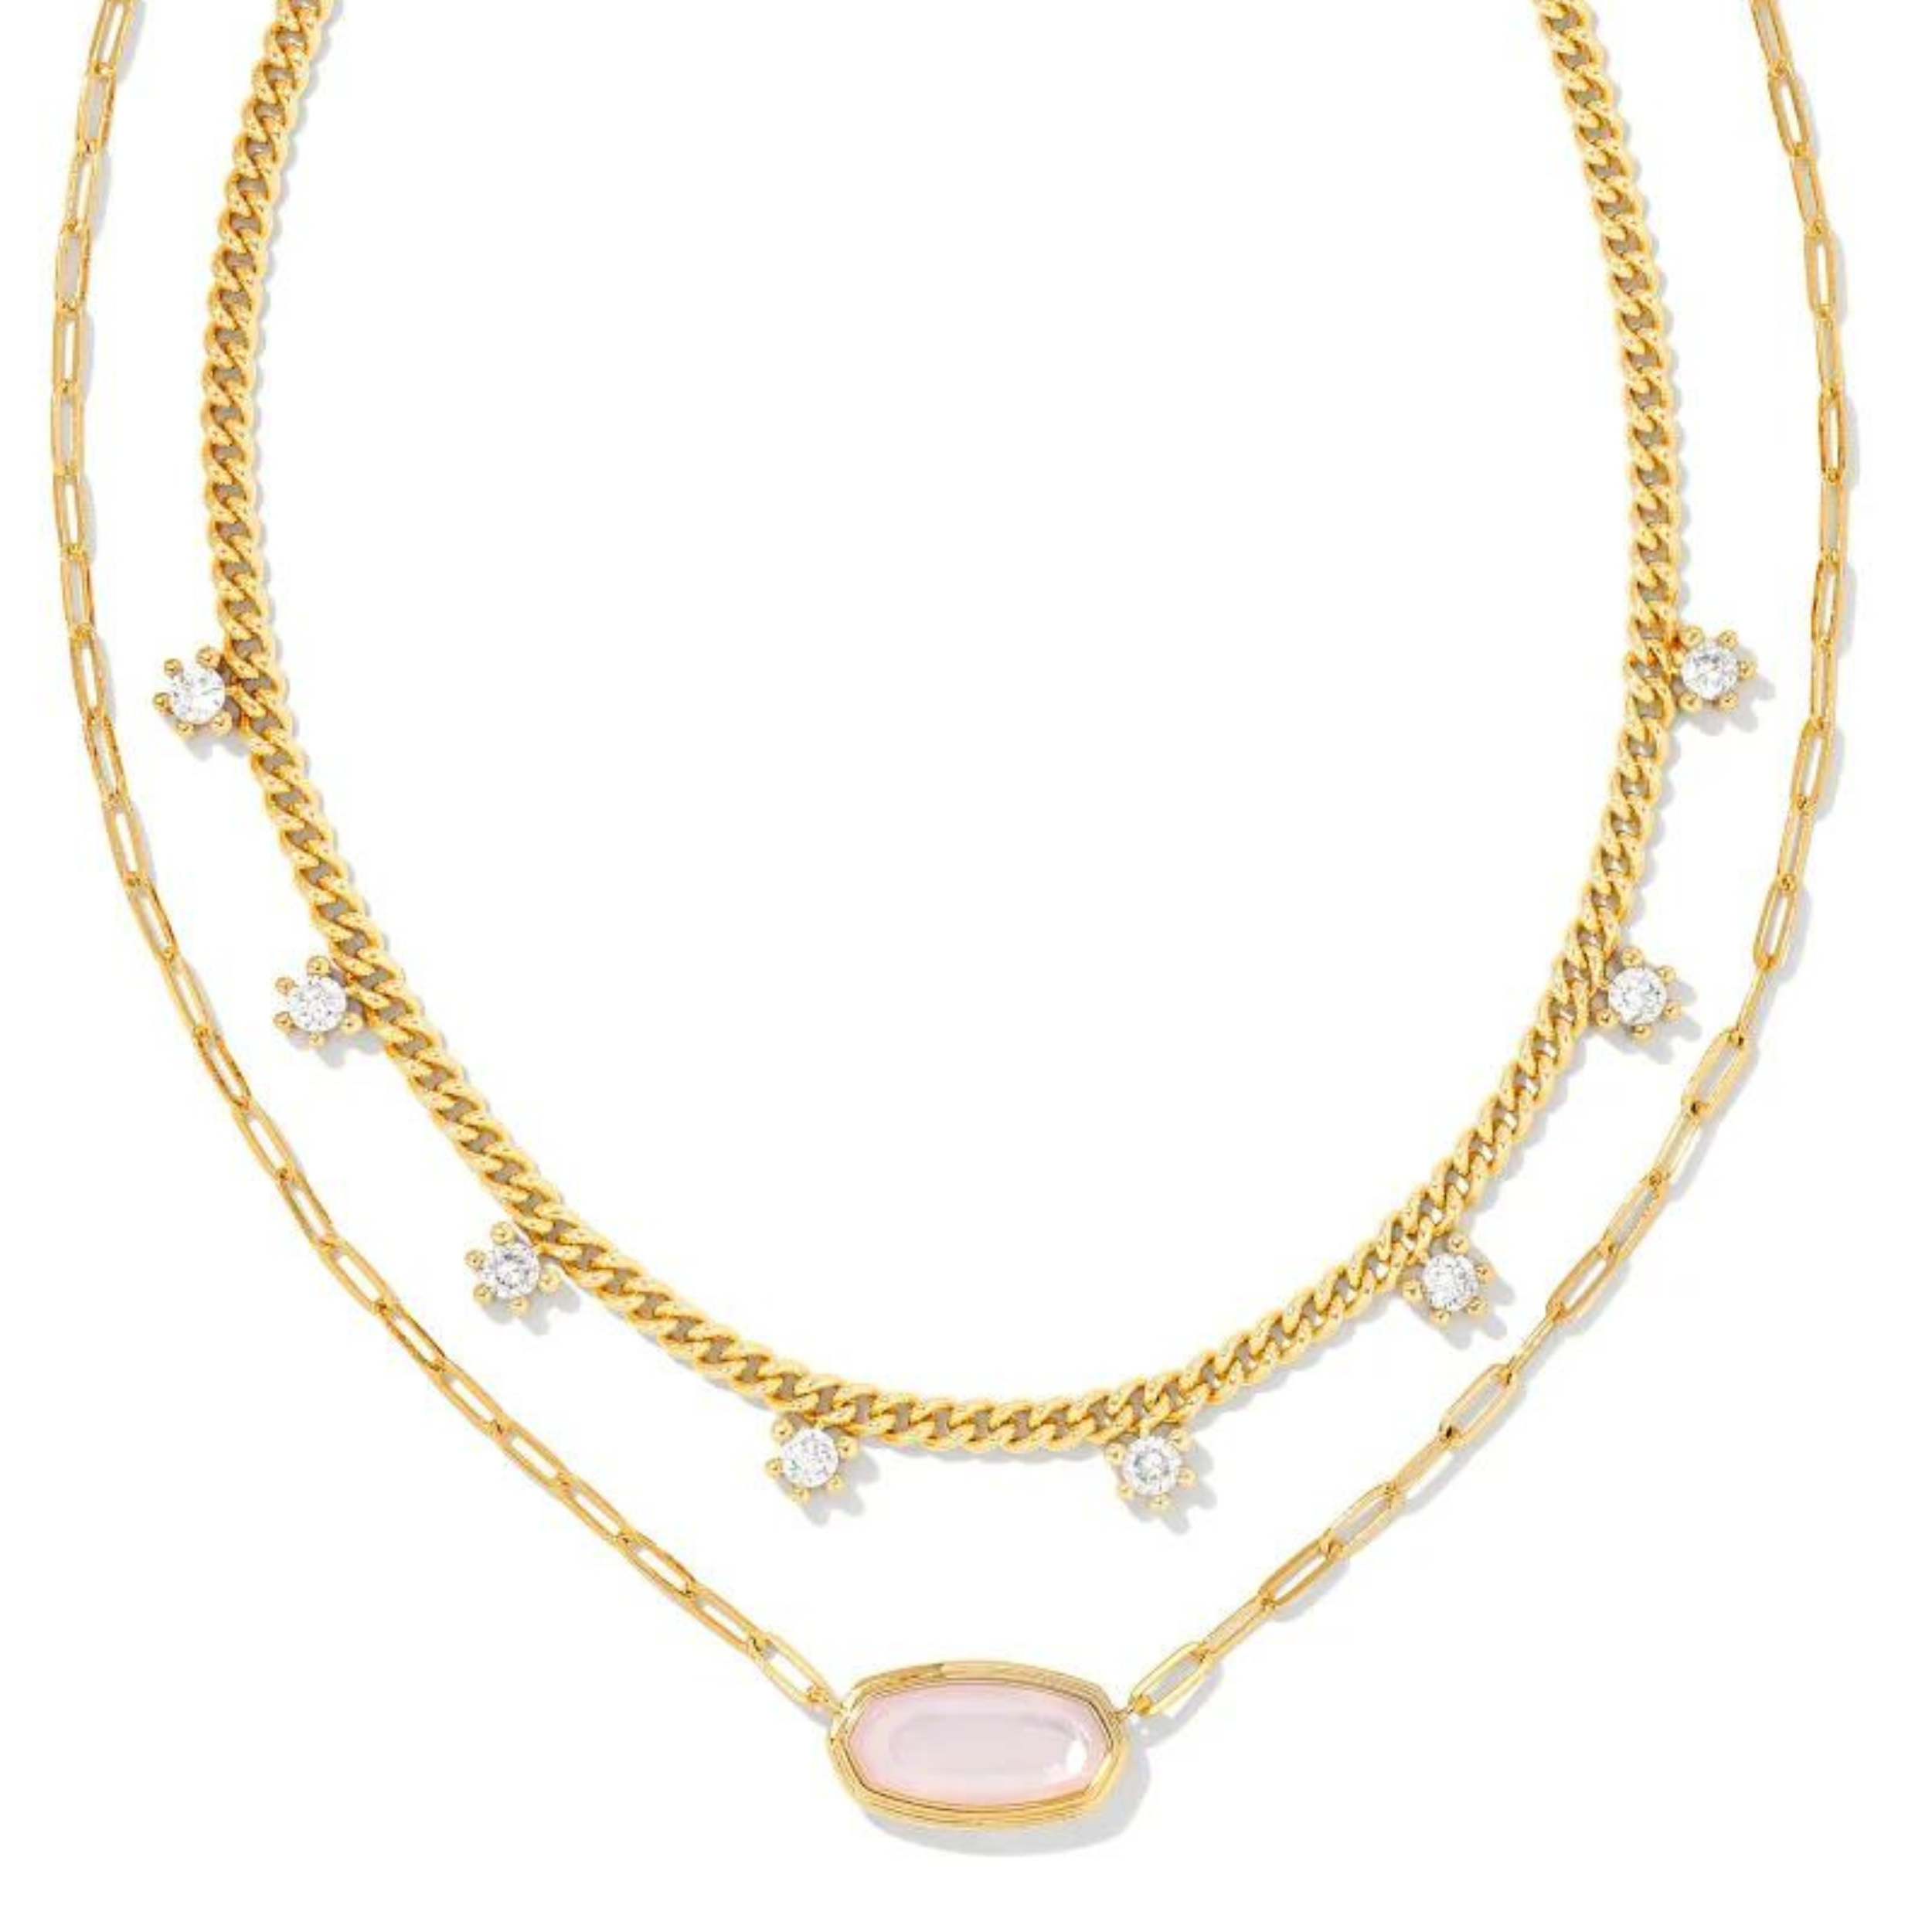 Gold multi strand necklace with white crystals and a Pink Opalite Illusion stone, pictured on a white background. 